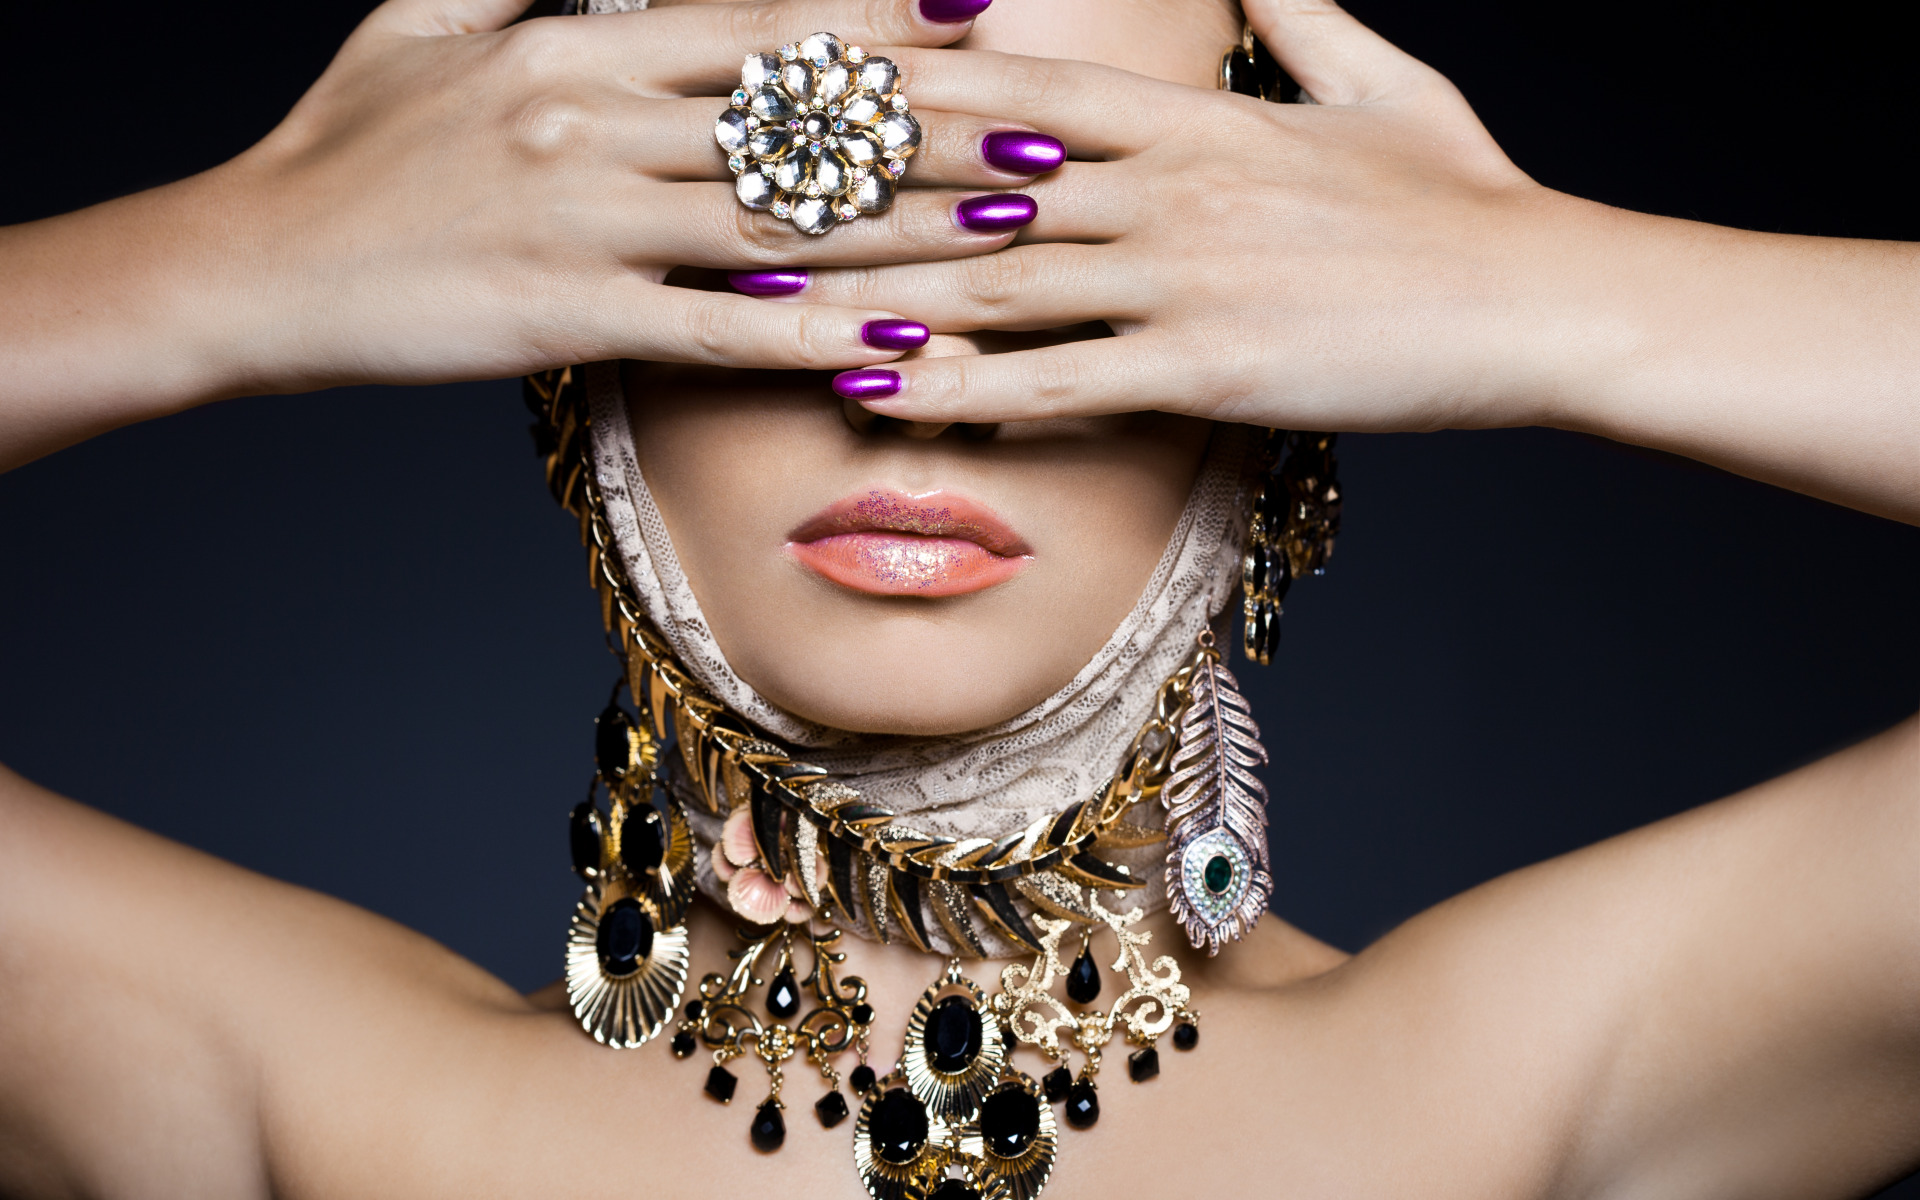 Woman Ring Jewelry Girl Face Hand Lipstick 1920x1200